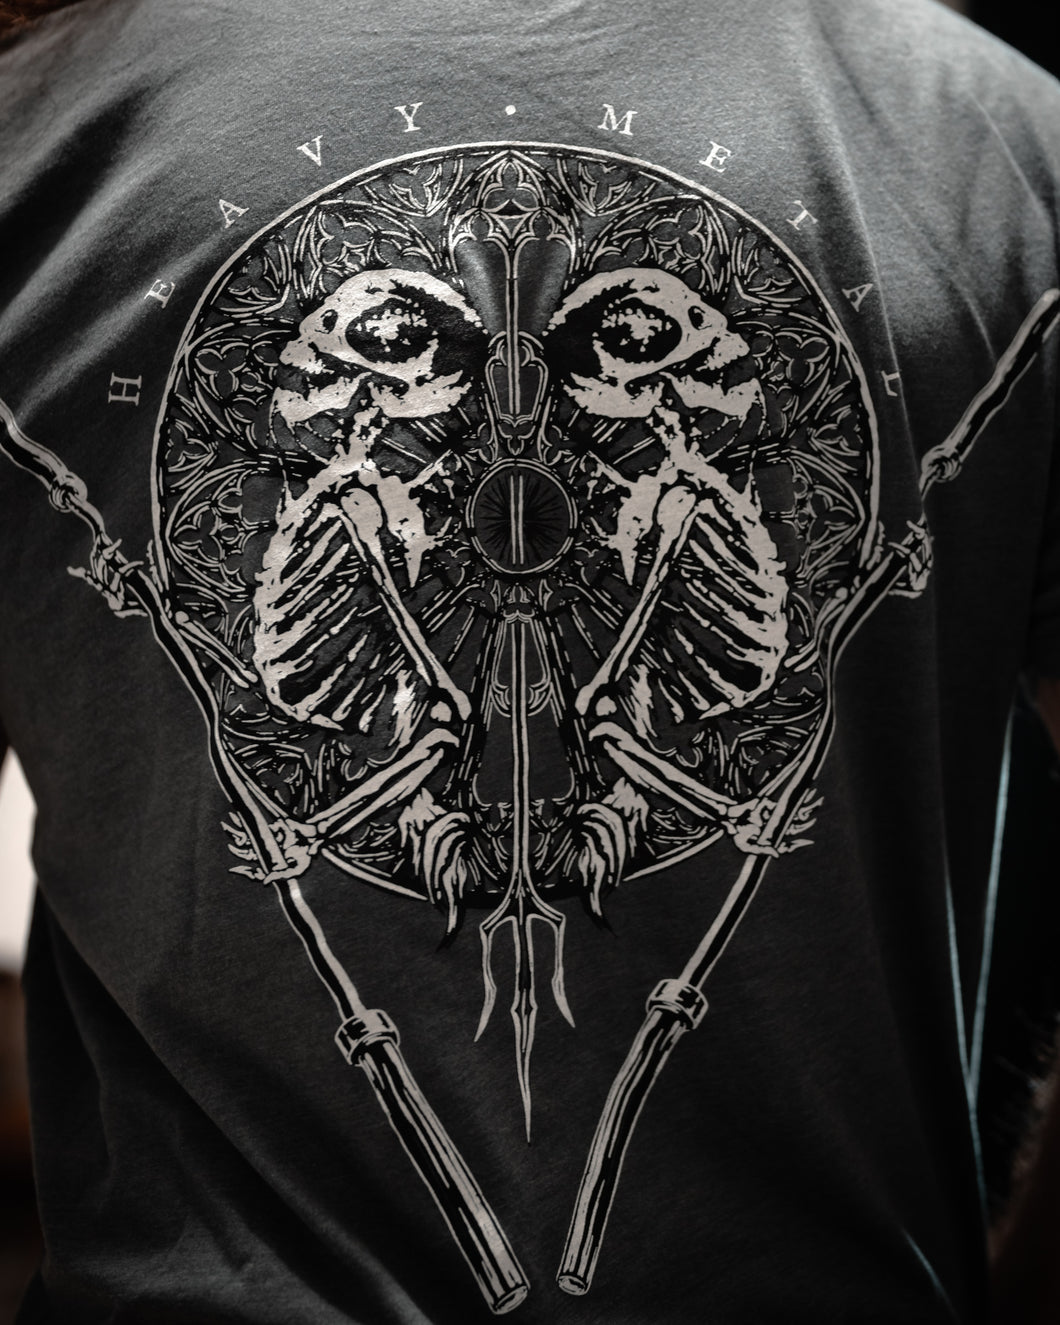 Heavy Metal (Limited Iron edition) Shirt